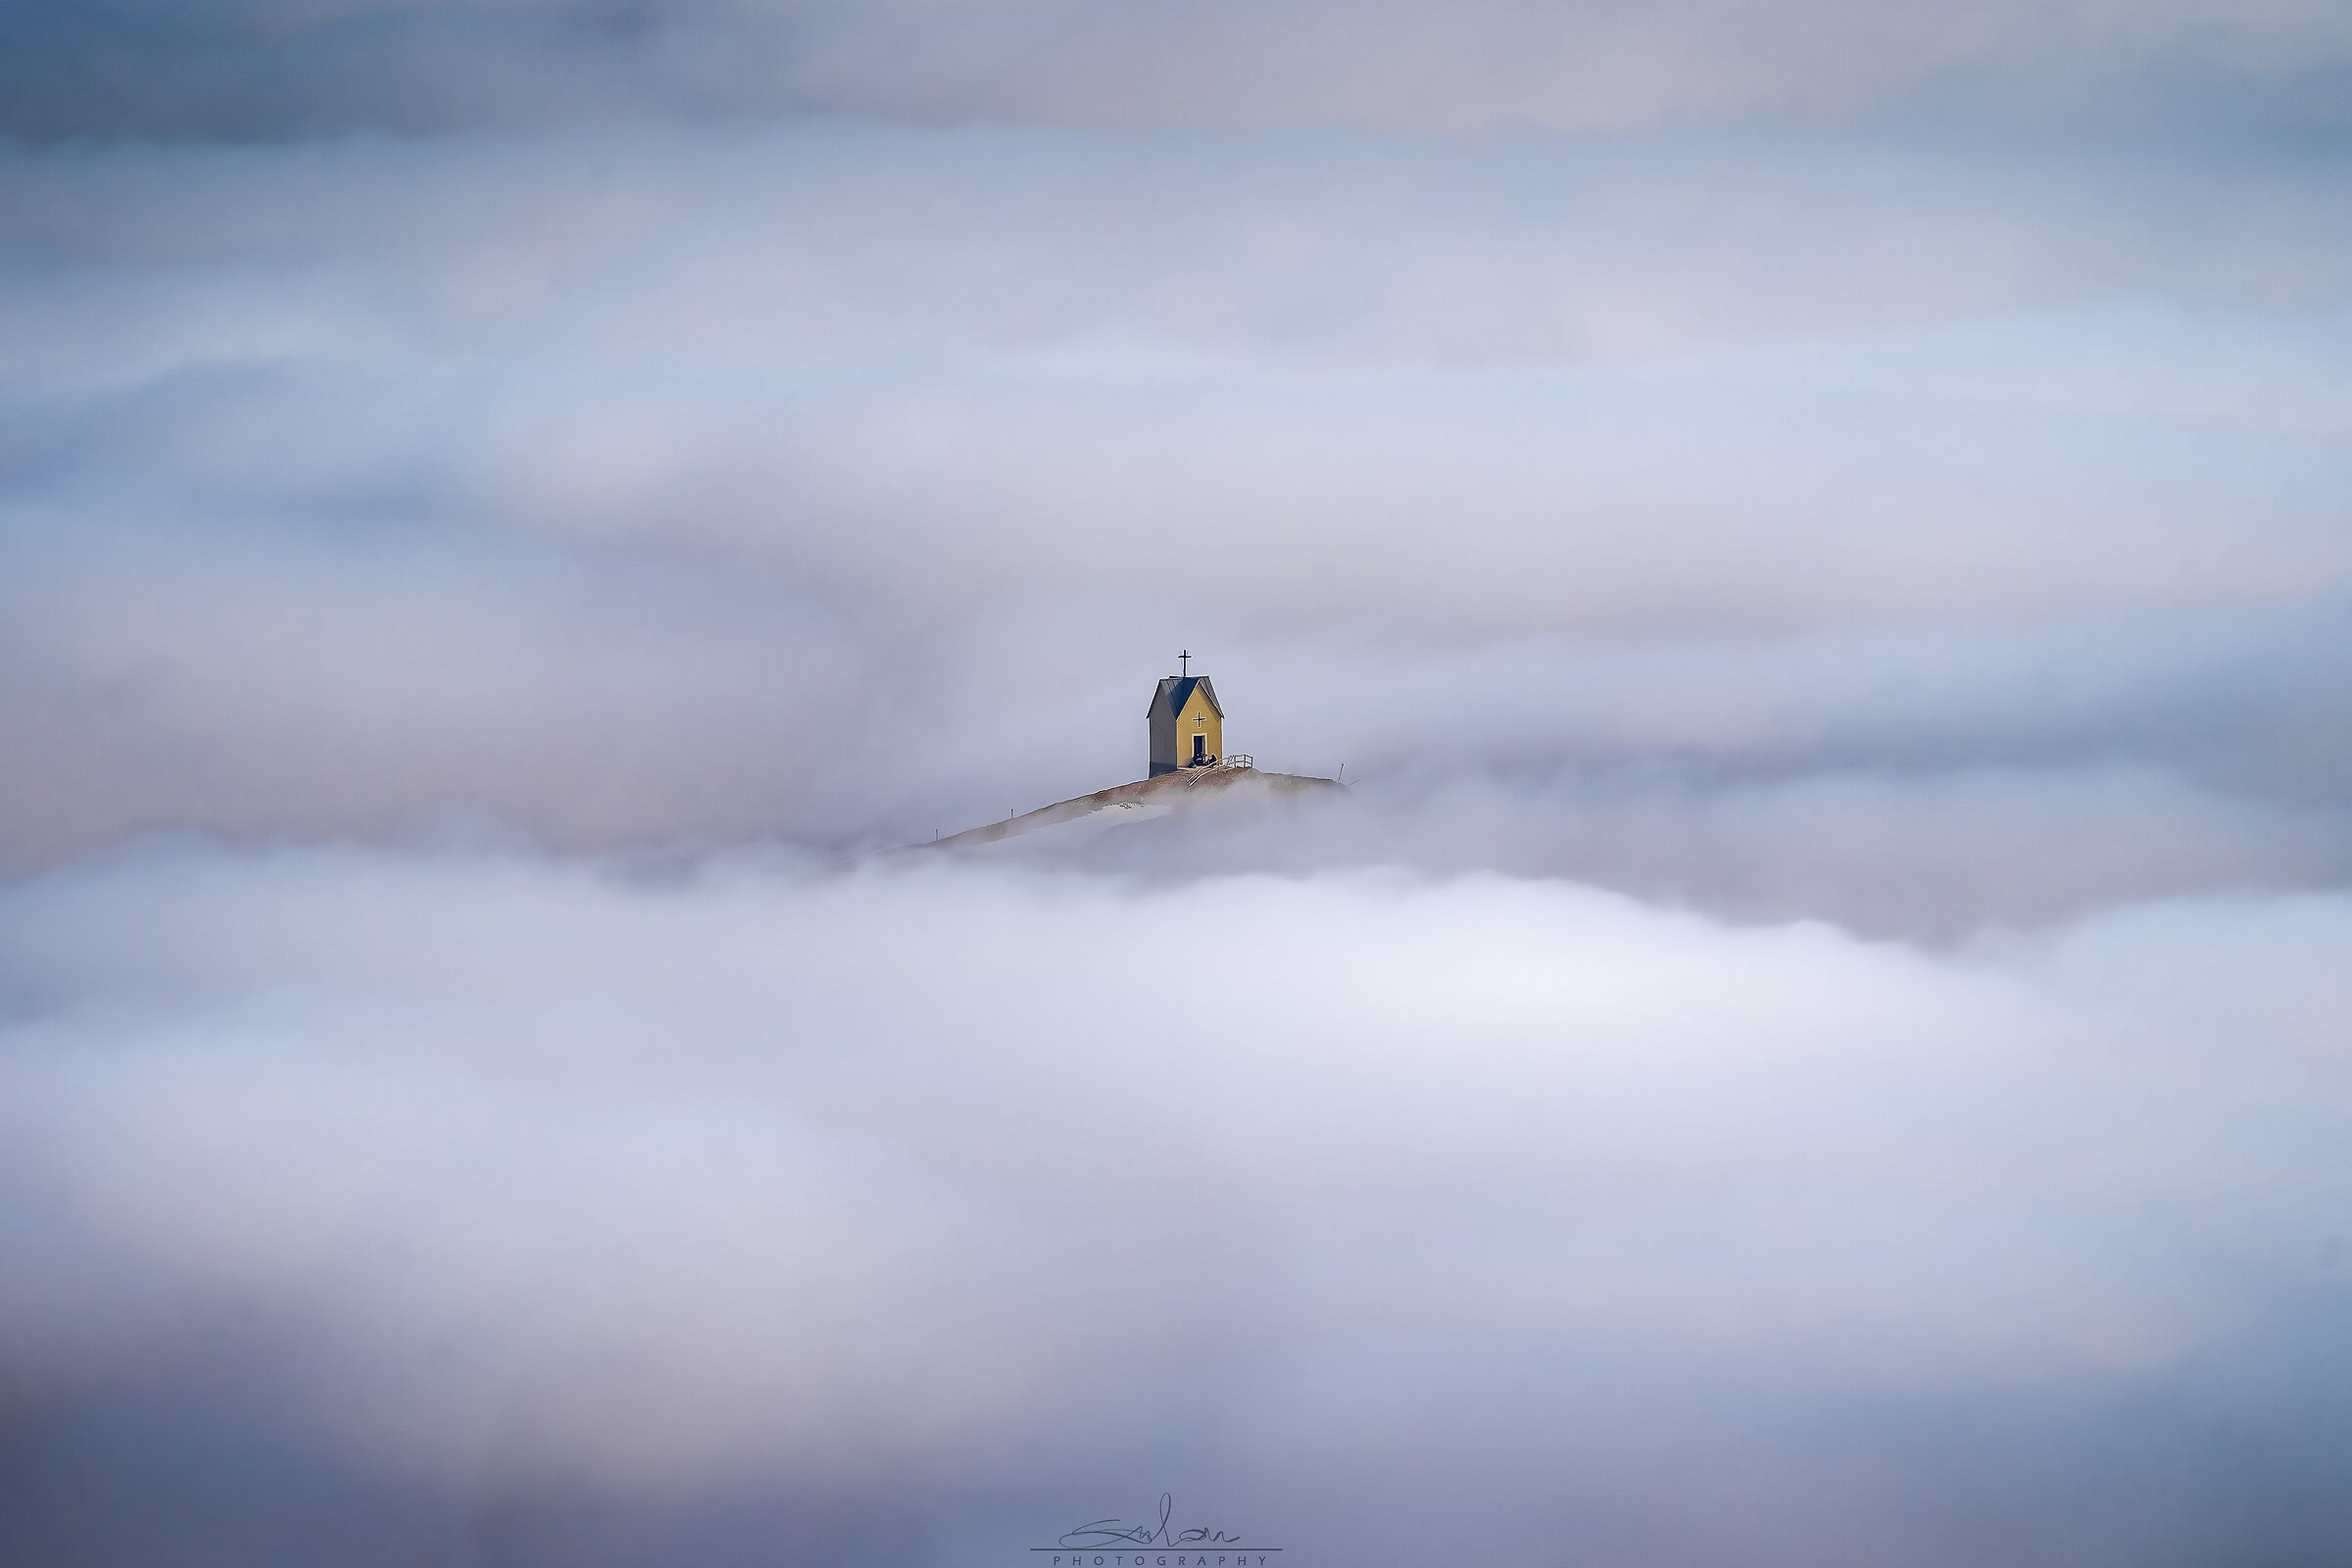 Loneliness in a sea of fog...